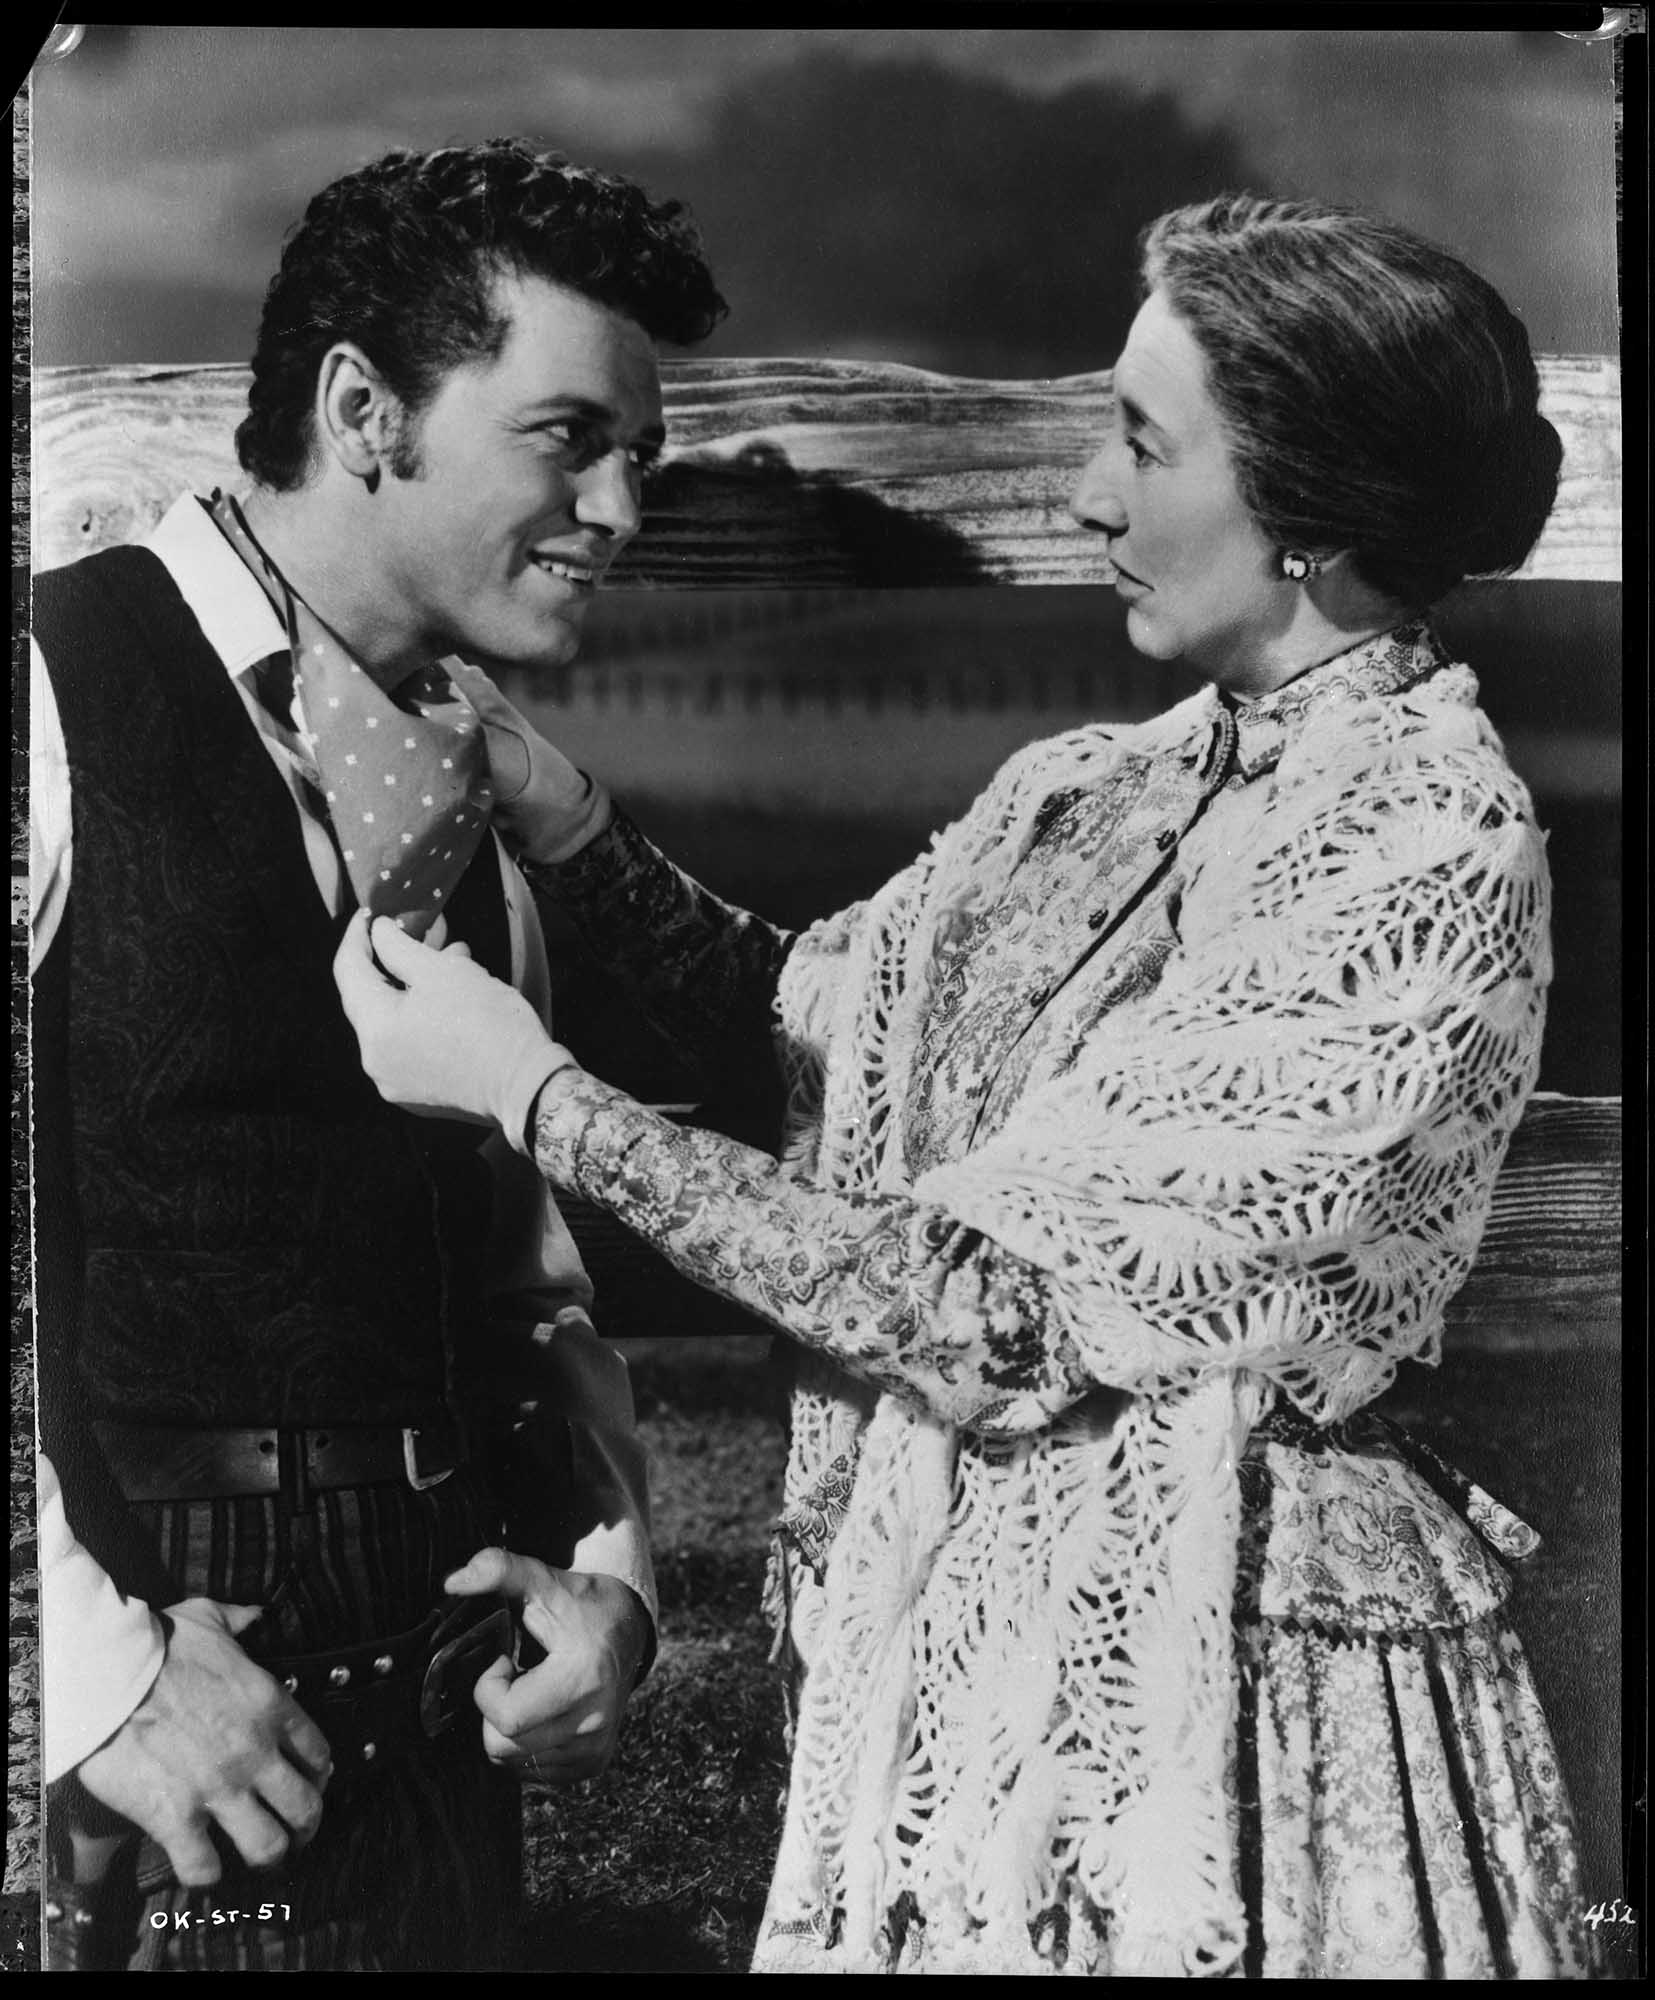 A photo from the 1955 Oklahoma! film.